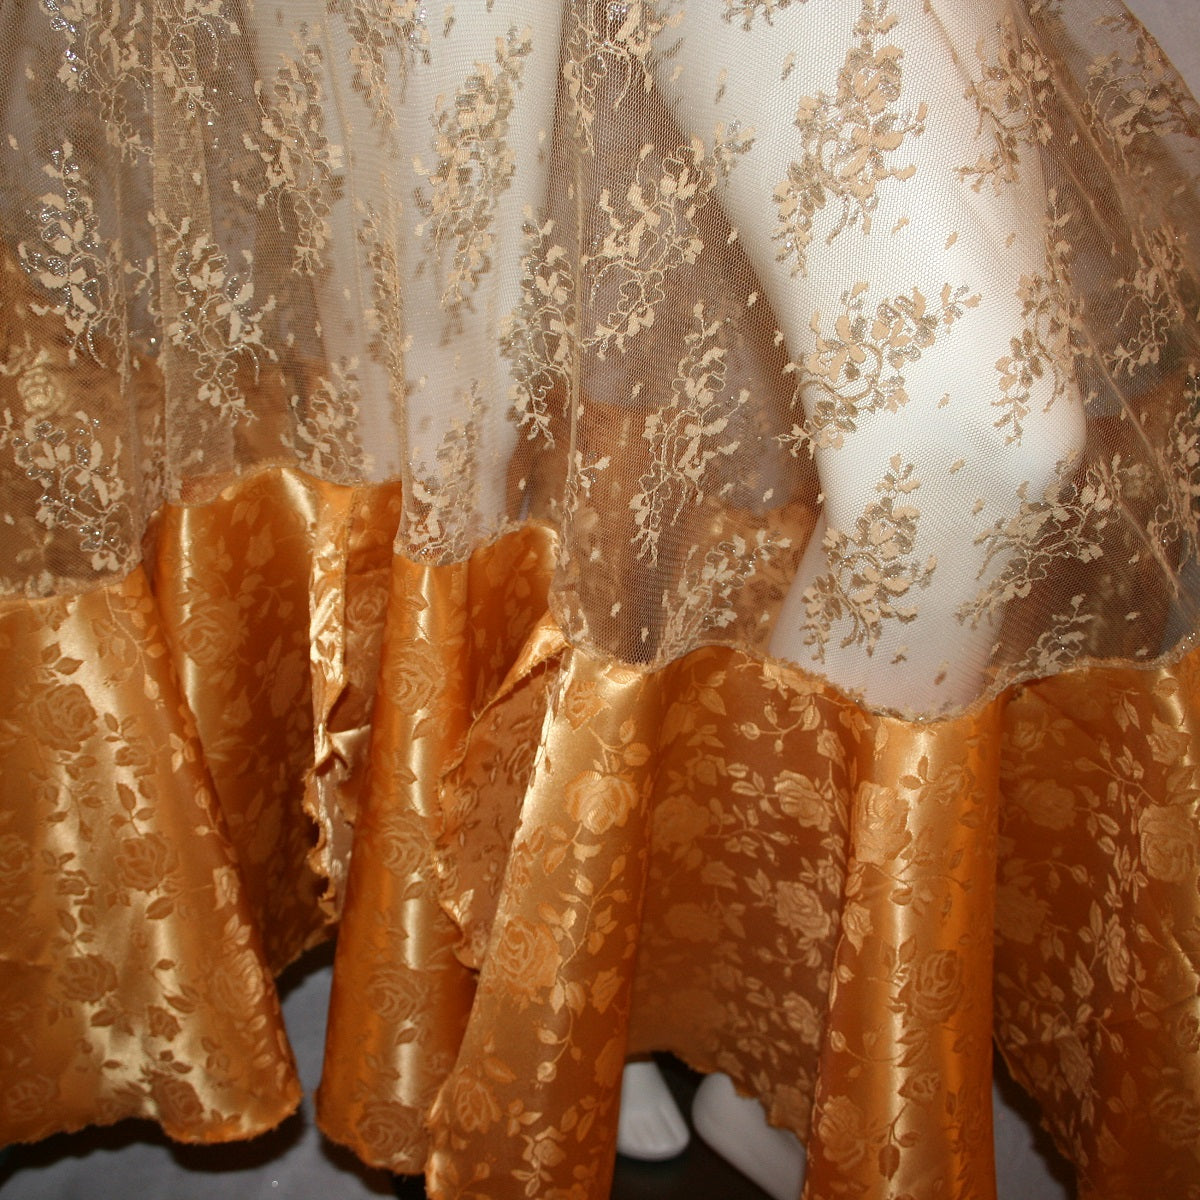 close up view of Ballroom skirt created on a nude illusion hip base of a gorgeous & delicate gold lace top flared section with gold brocade flounces at the bottom. 